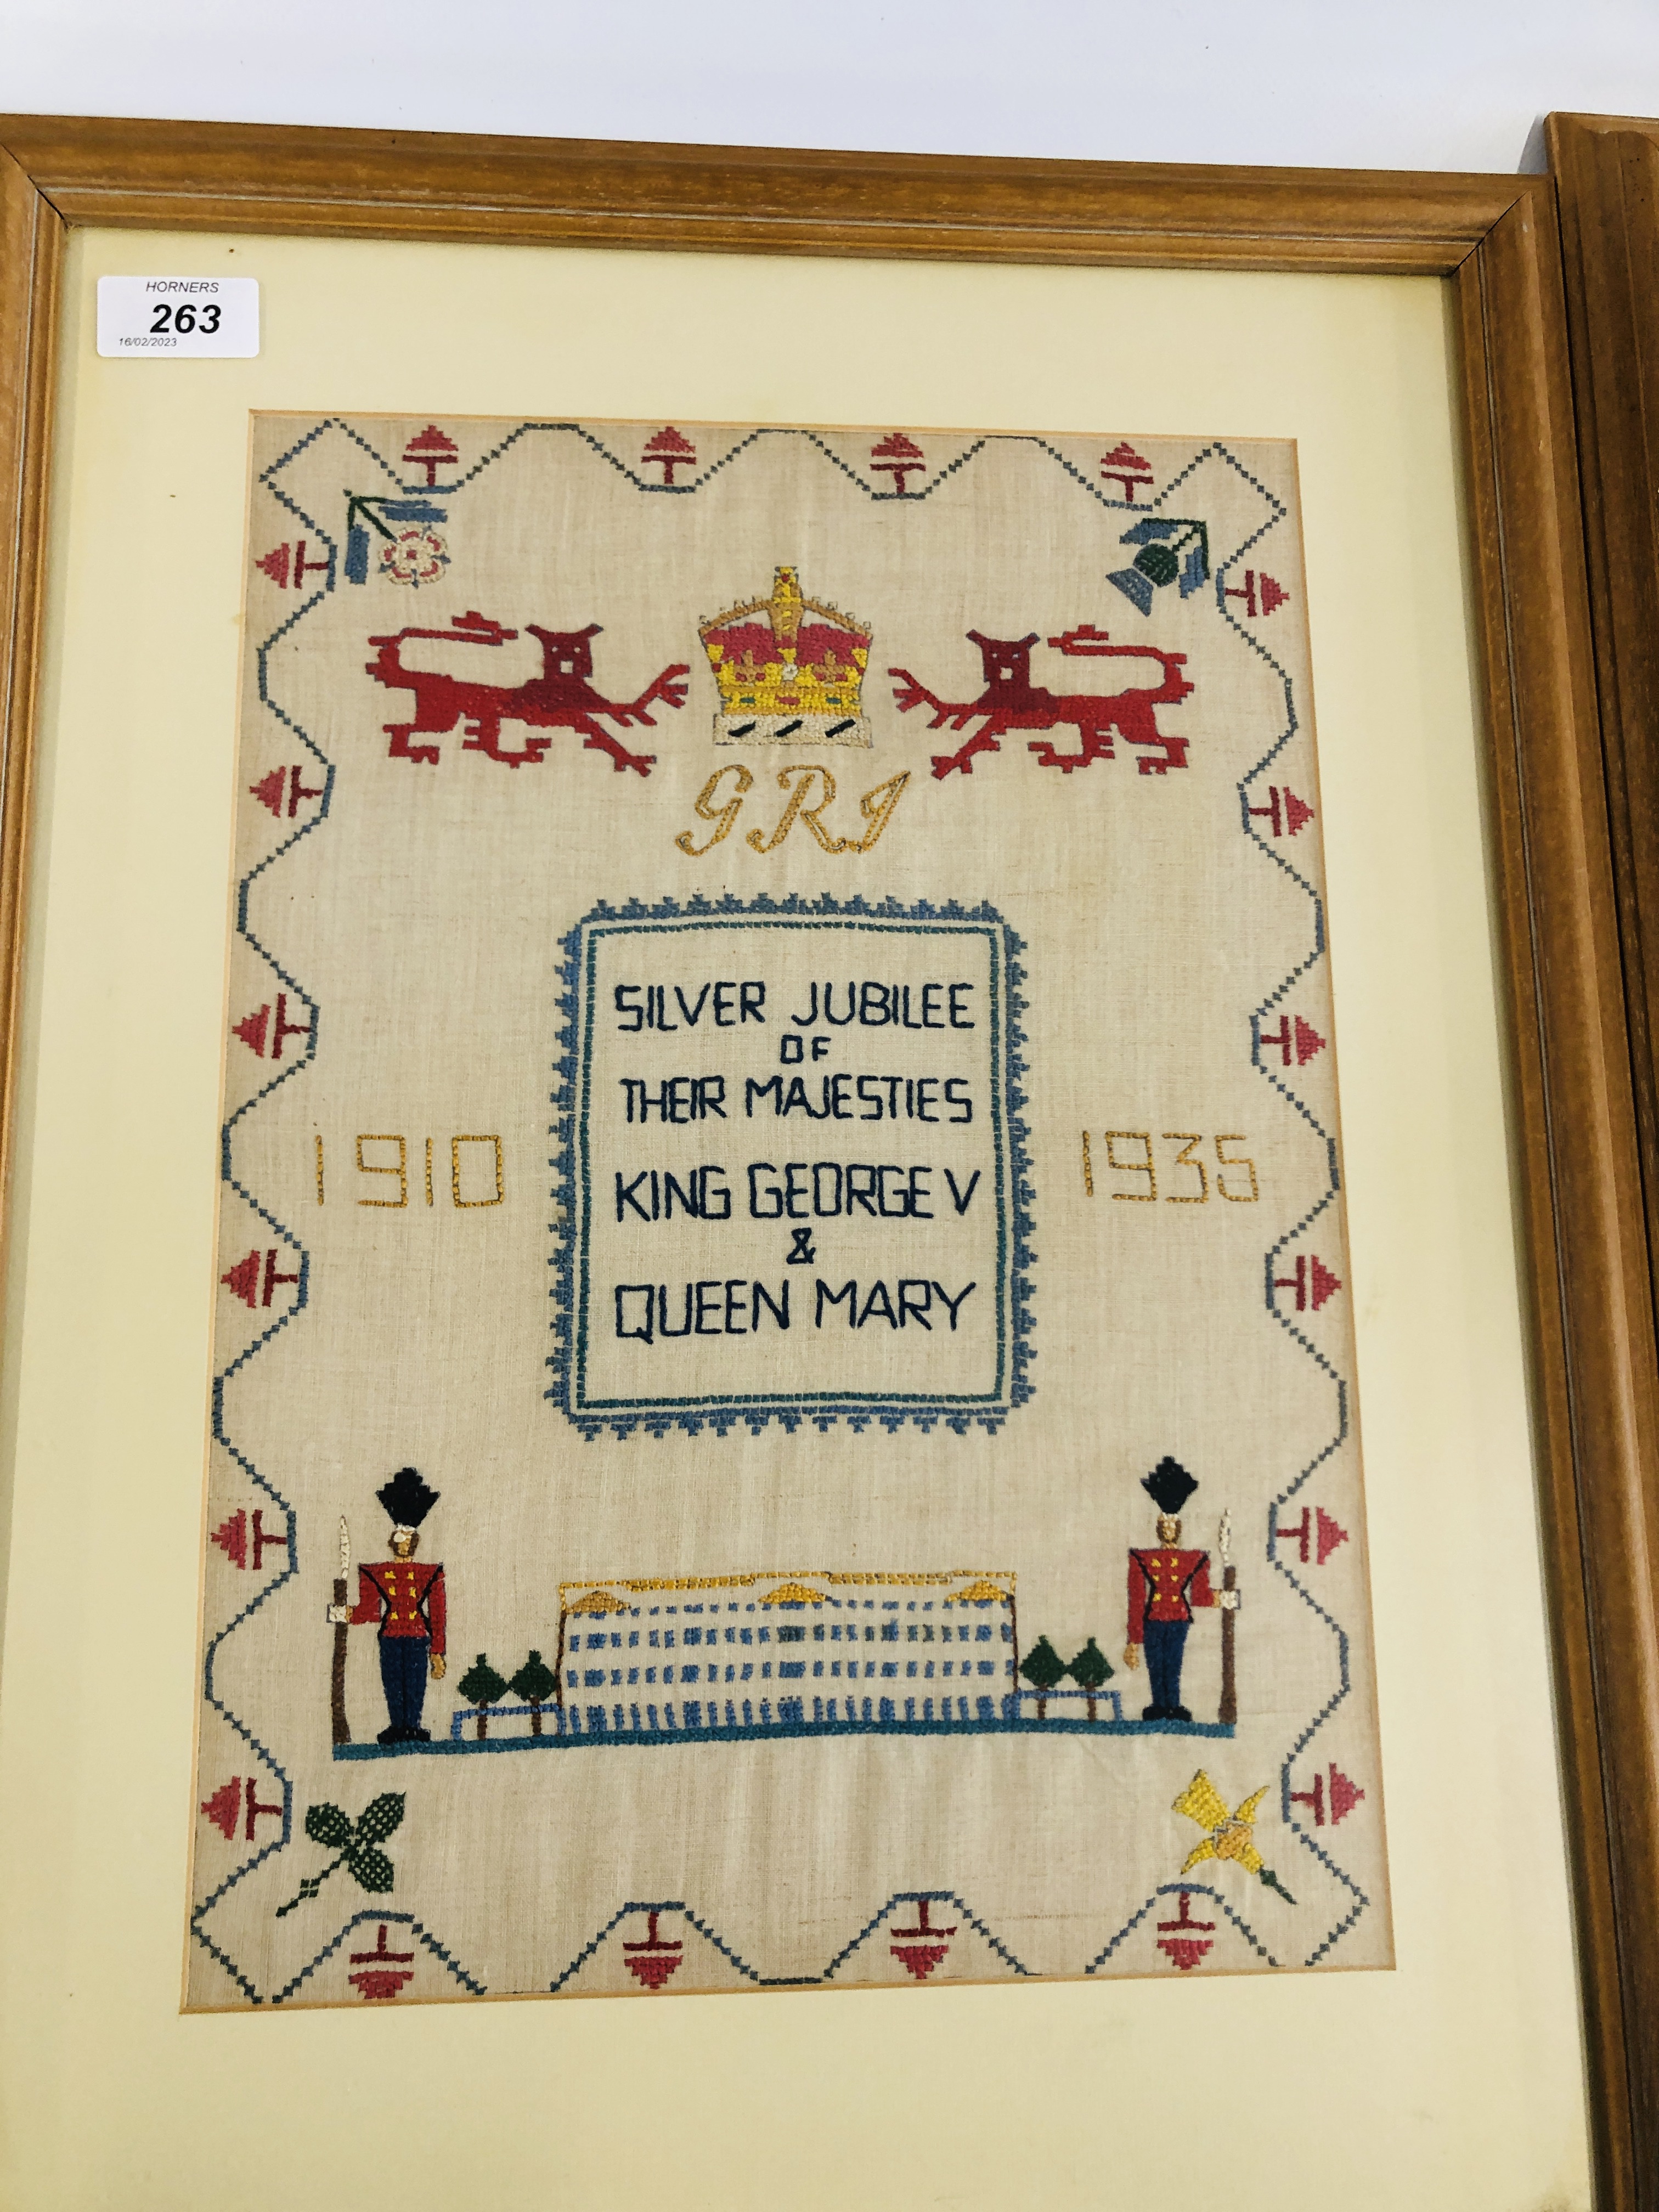 TWO FRAMED SAMPLERS TO INCLUDE "SILVER JUBILEE OF THEIR MAJESTIES KING GEORGE V AND QUEEN MARY" - Image 3 of 4